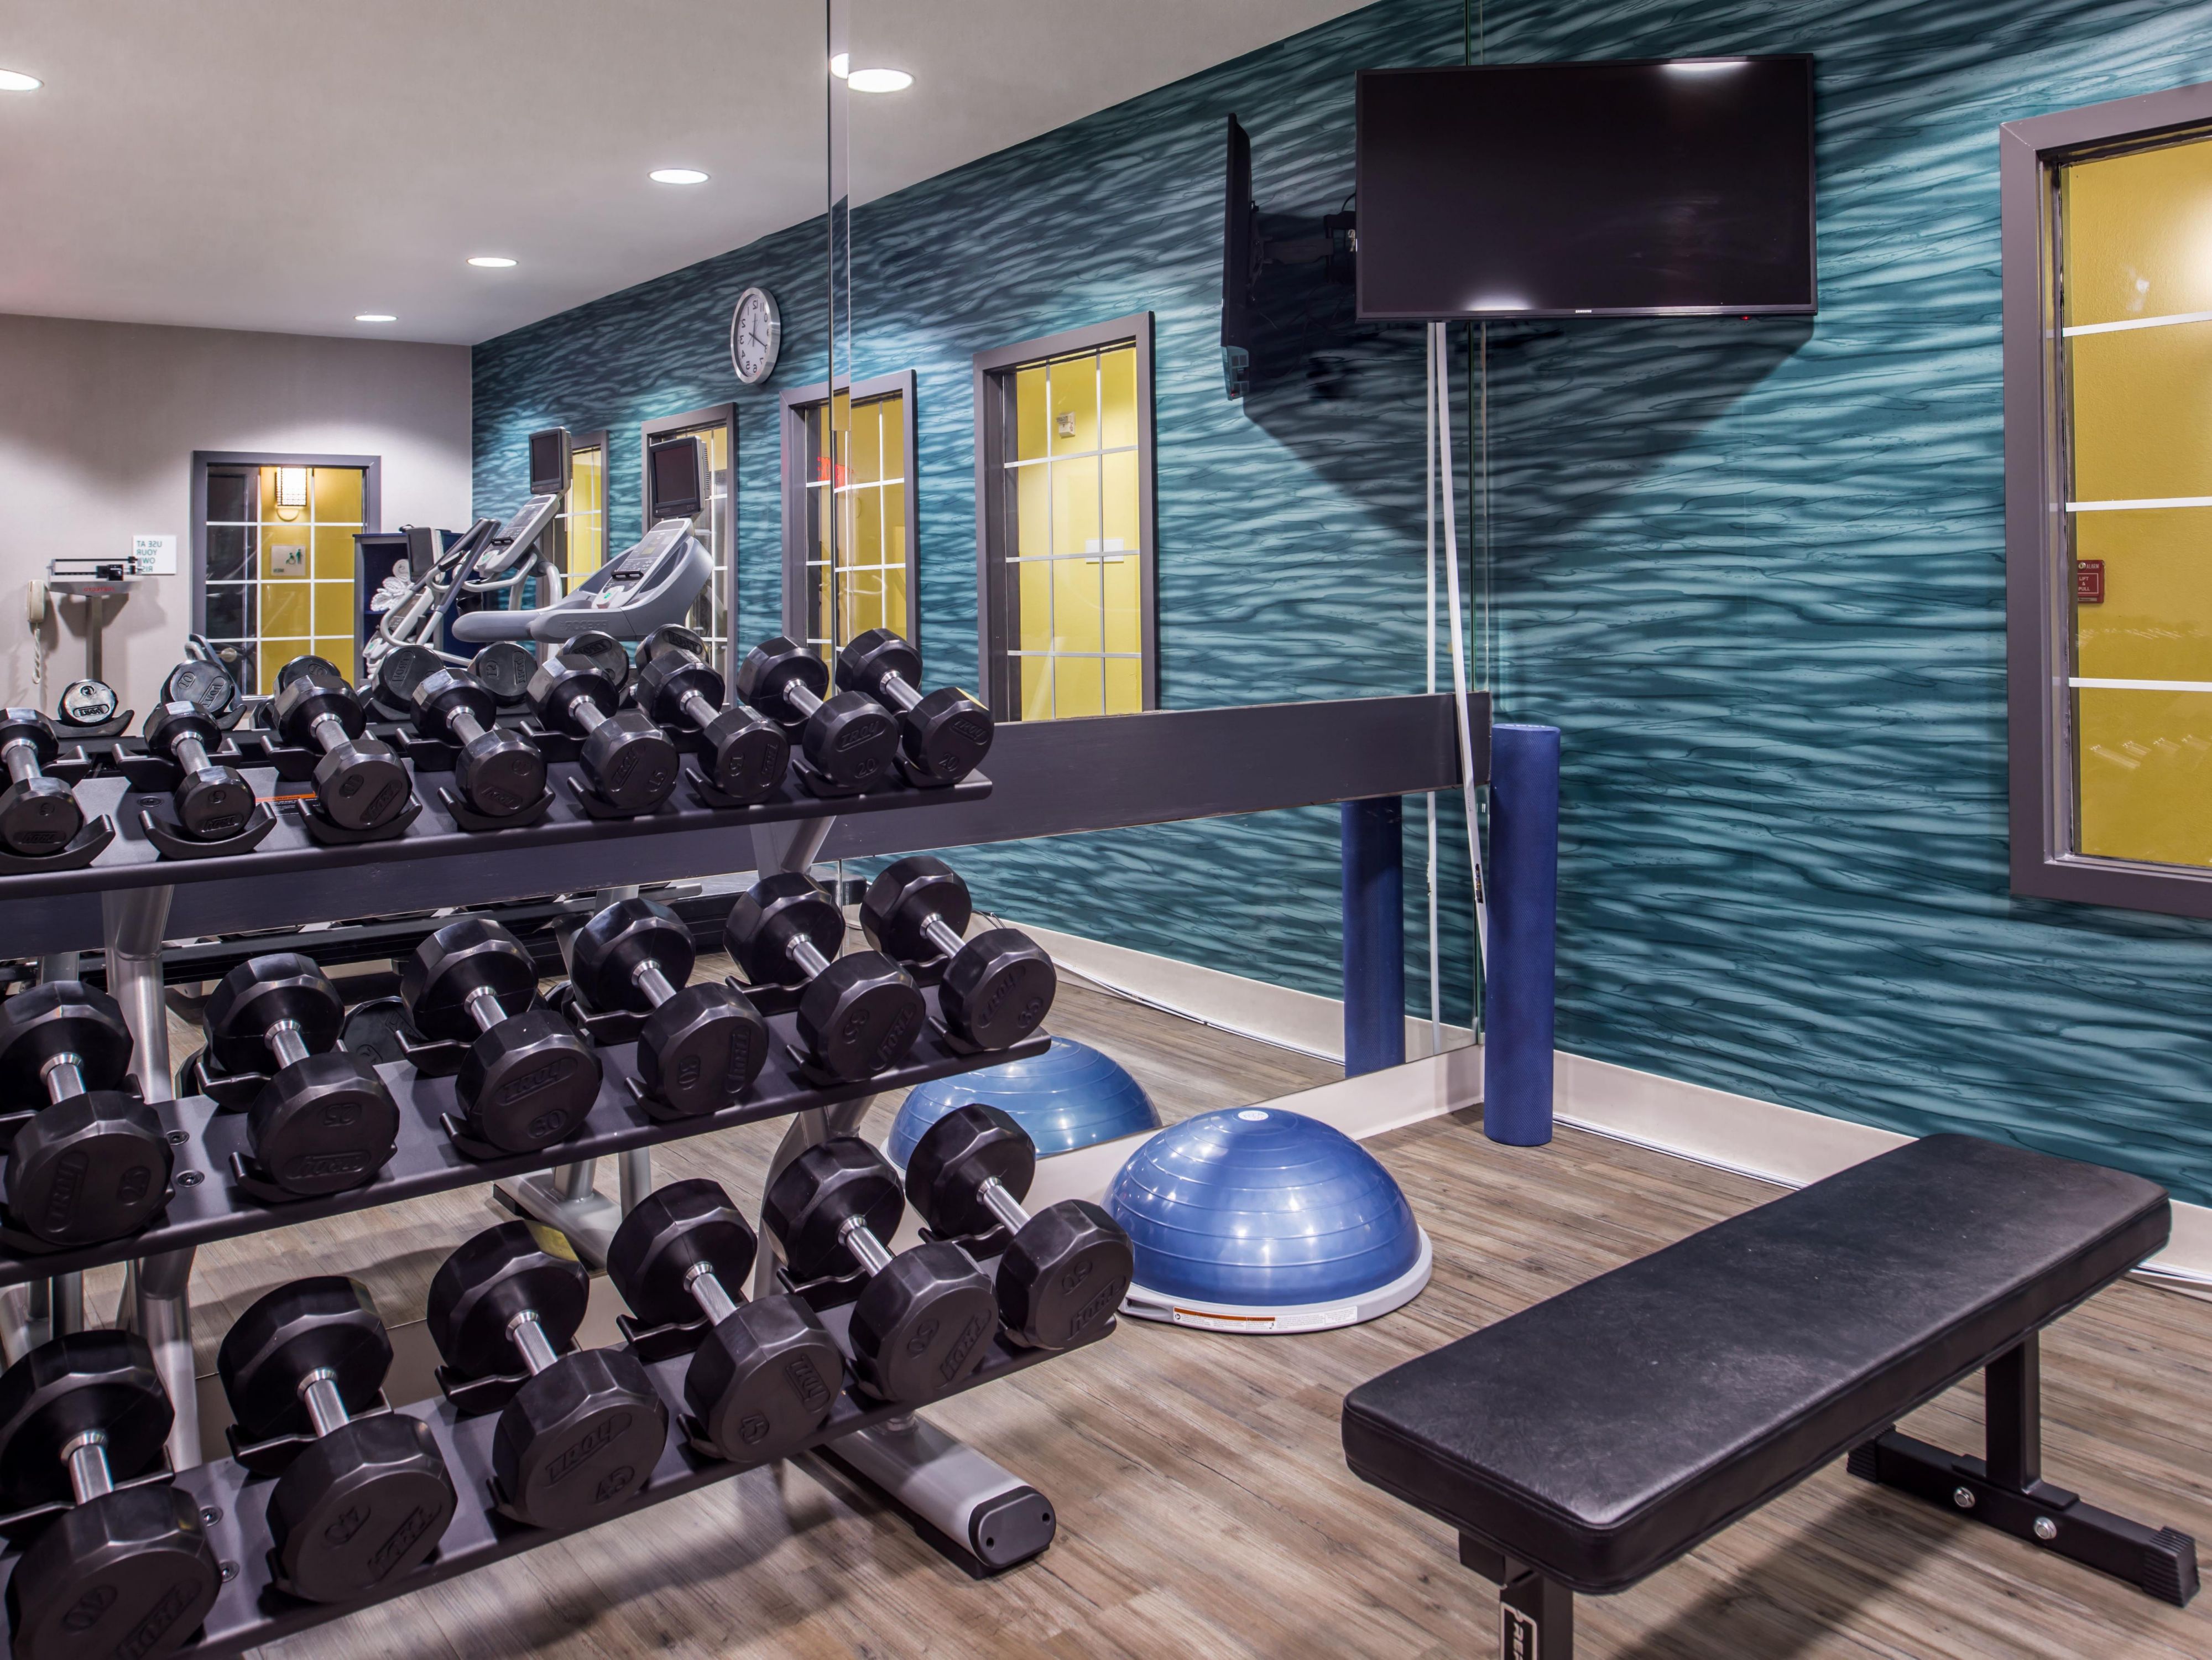 Don't skip a beat on your workout routine when you travel. Our updated Fitness Center features cardio machines and free weights for your perfect workout!